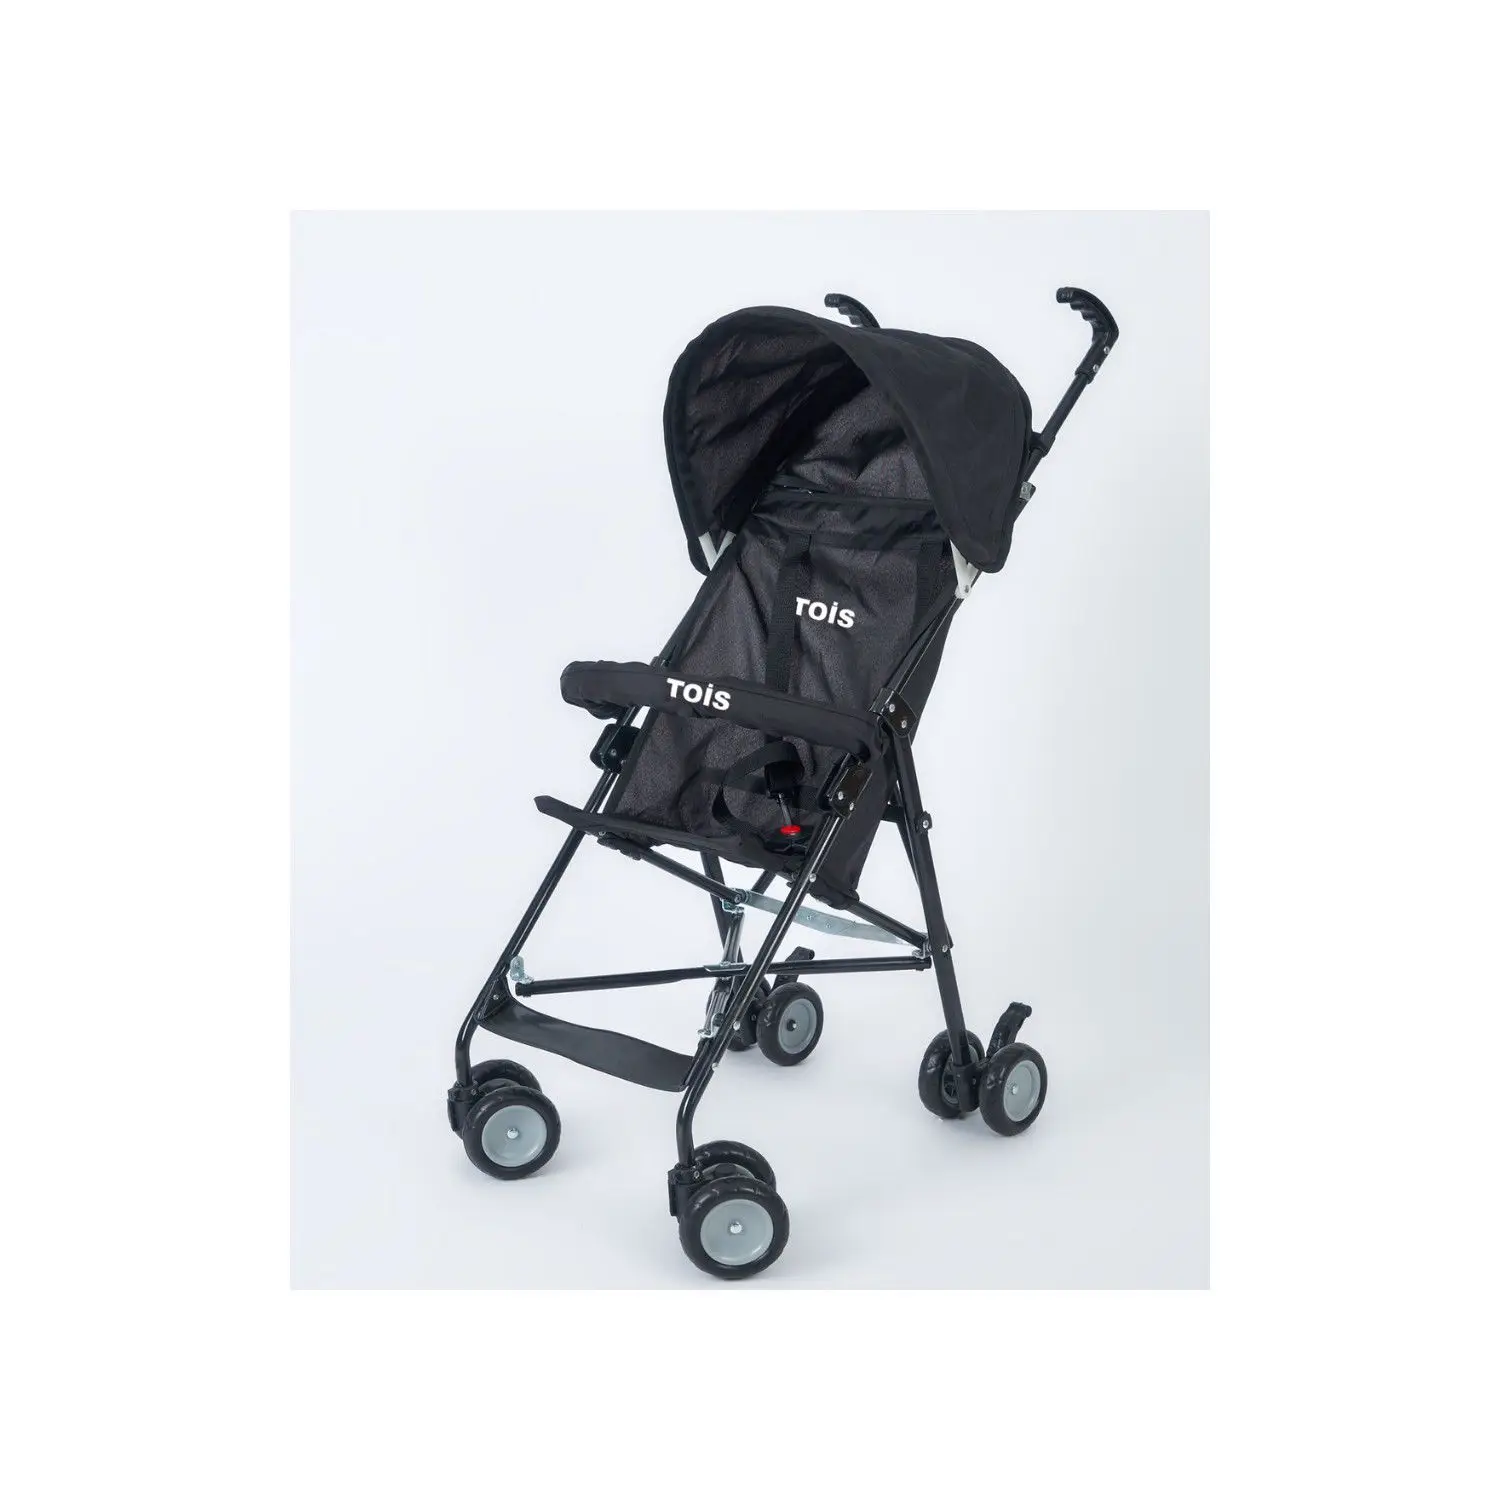 Front Bull Bar Practical Cane Baby Trolley carbon car handle stroller bumper sleeve bag armrest protective cover trolley